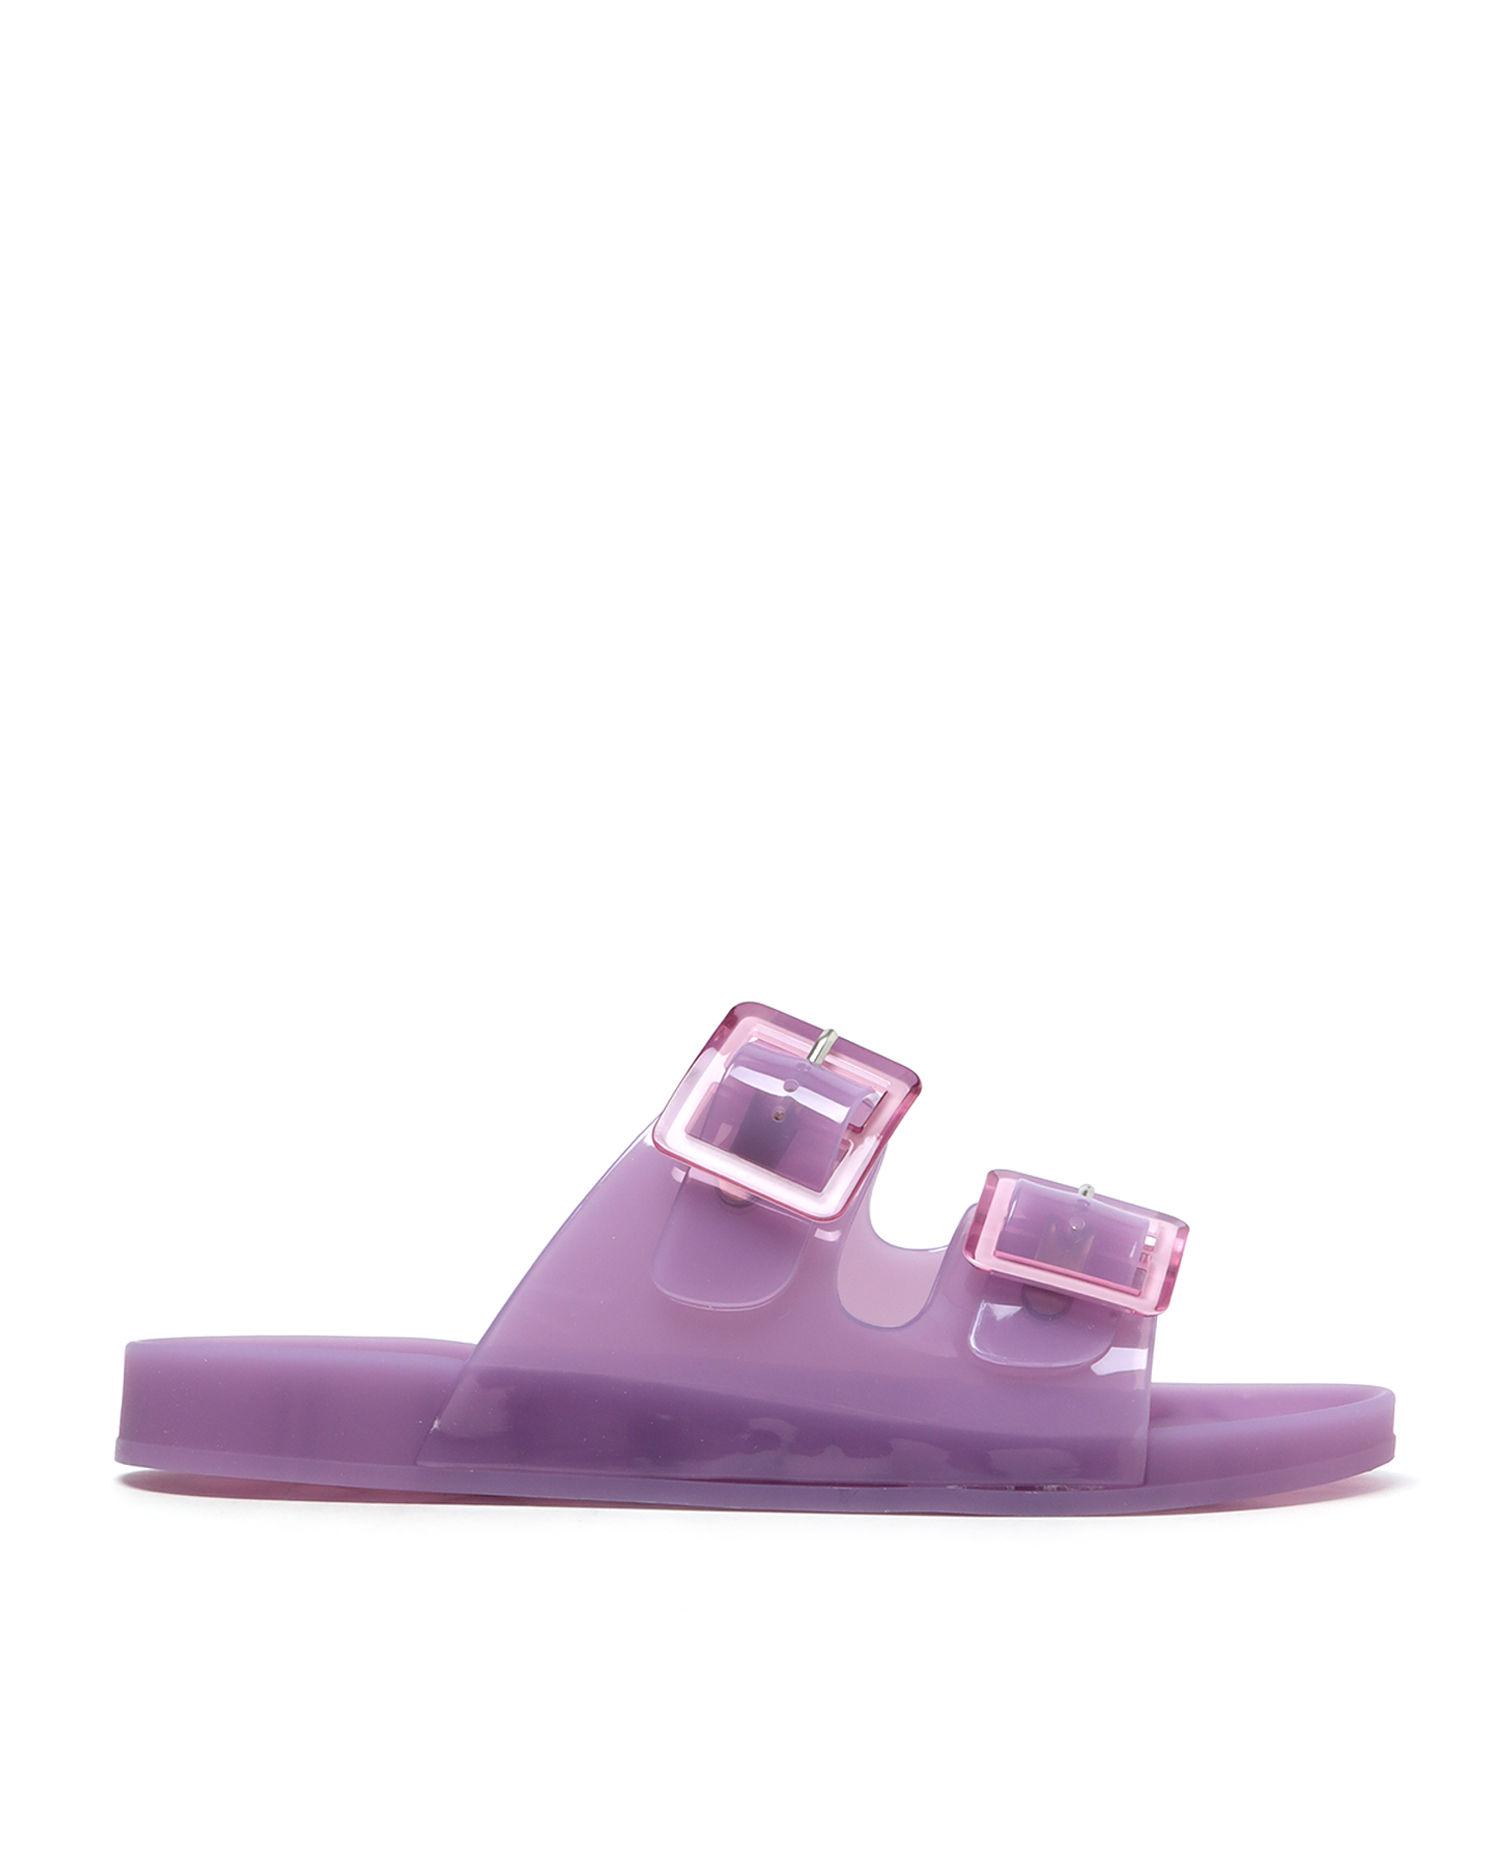 Monochrome jelly sandals by COLORS OF CALIFORNIA